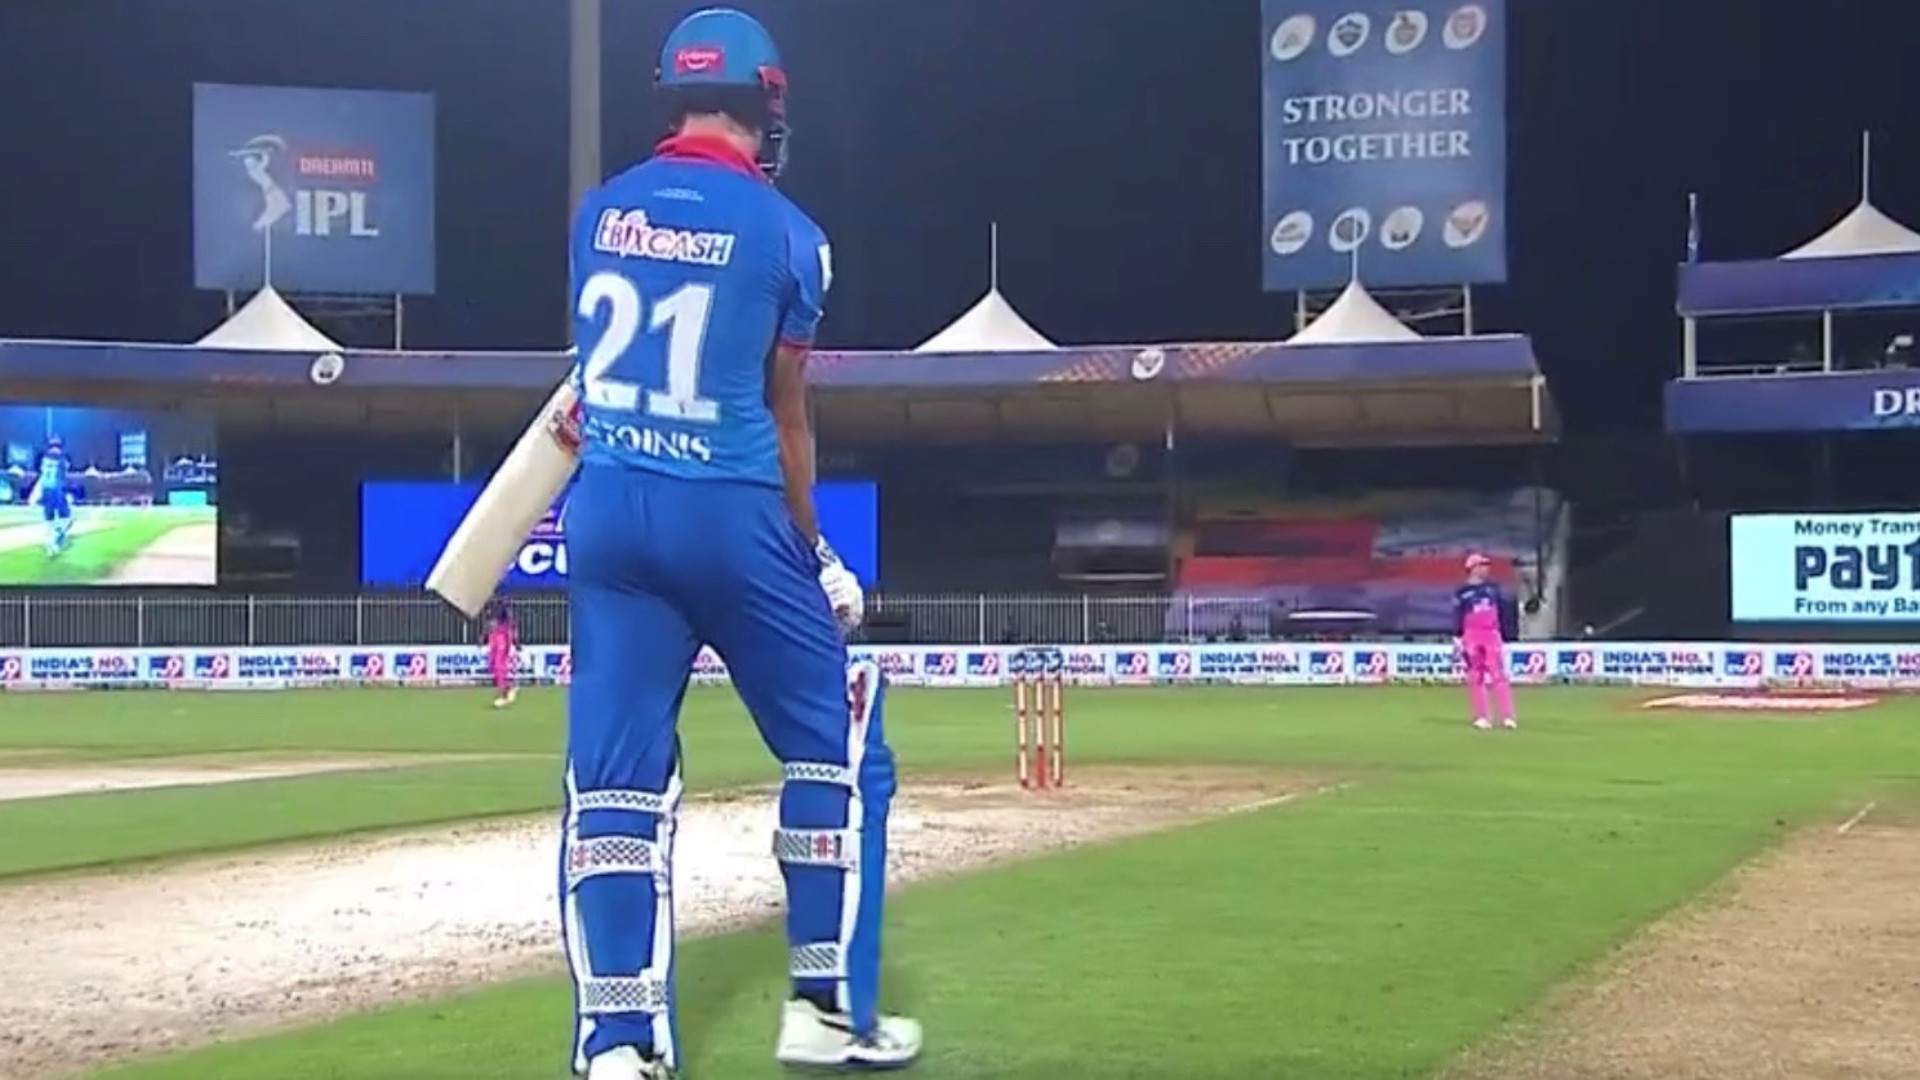 Marcus Stoinis walks to the crease in RR vs DC in IPL 2020. (Image credit: Twitter)